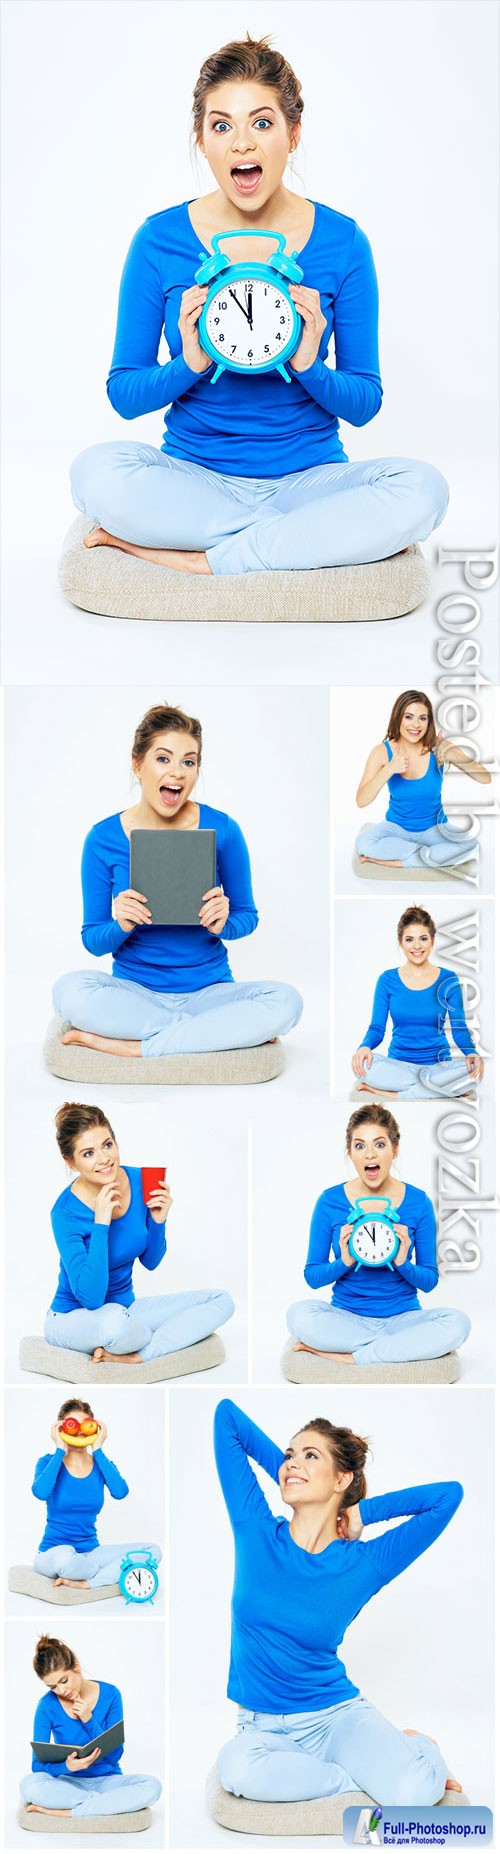 Cheerful young woman in different situations stock photo